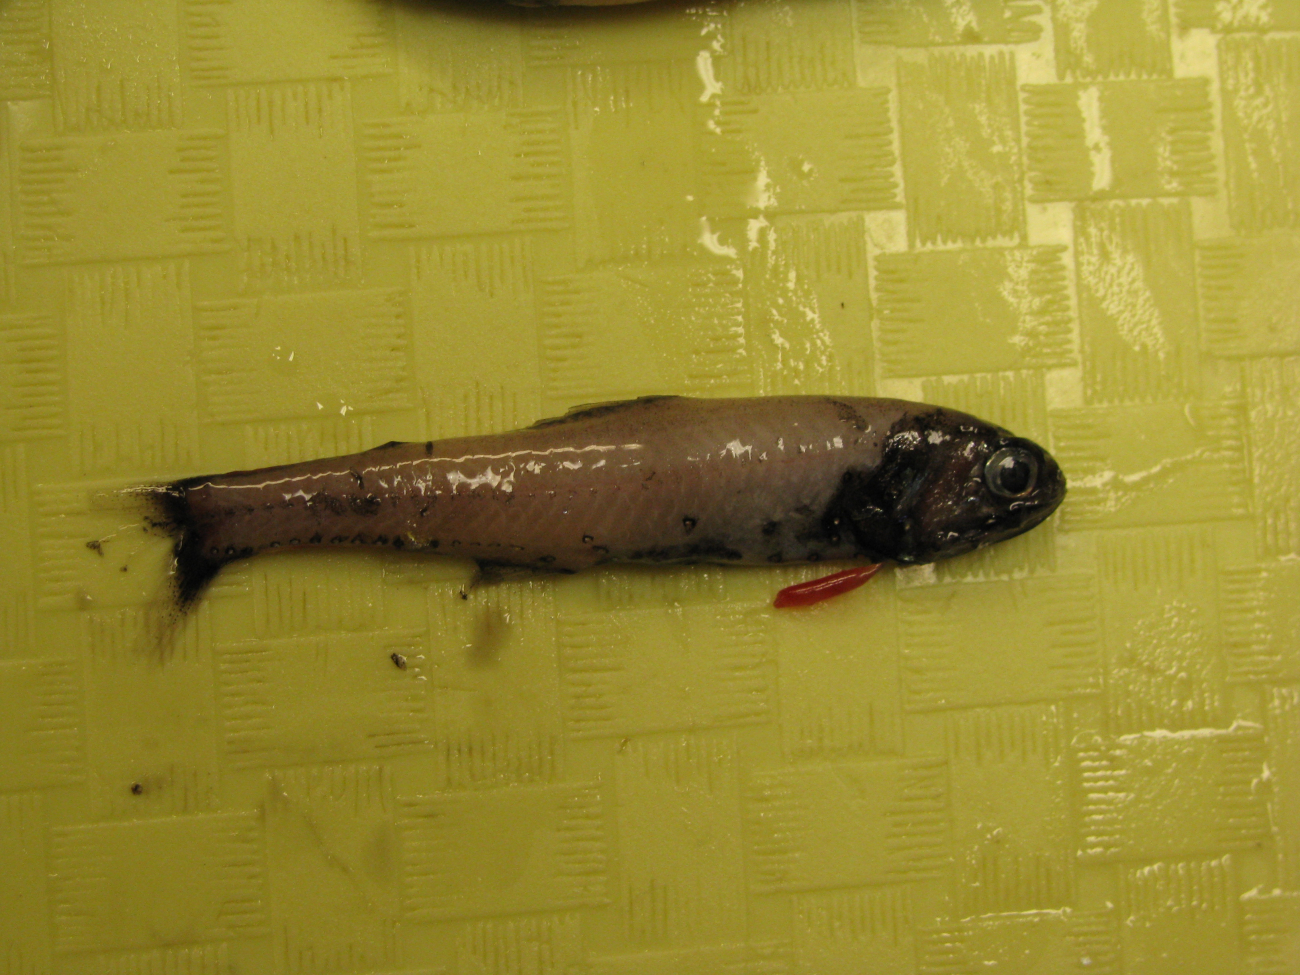 Mictophid mid-water fish